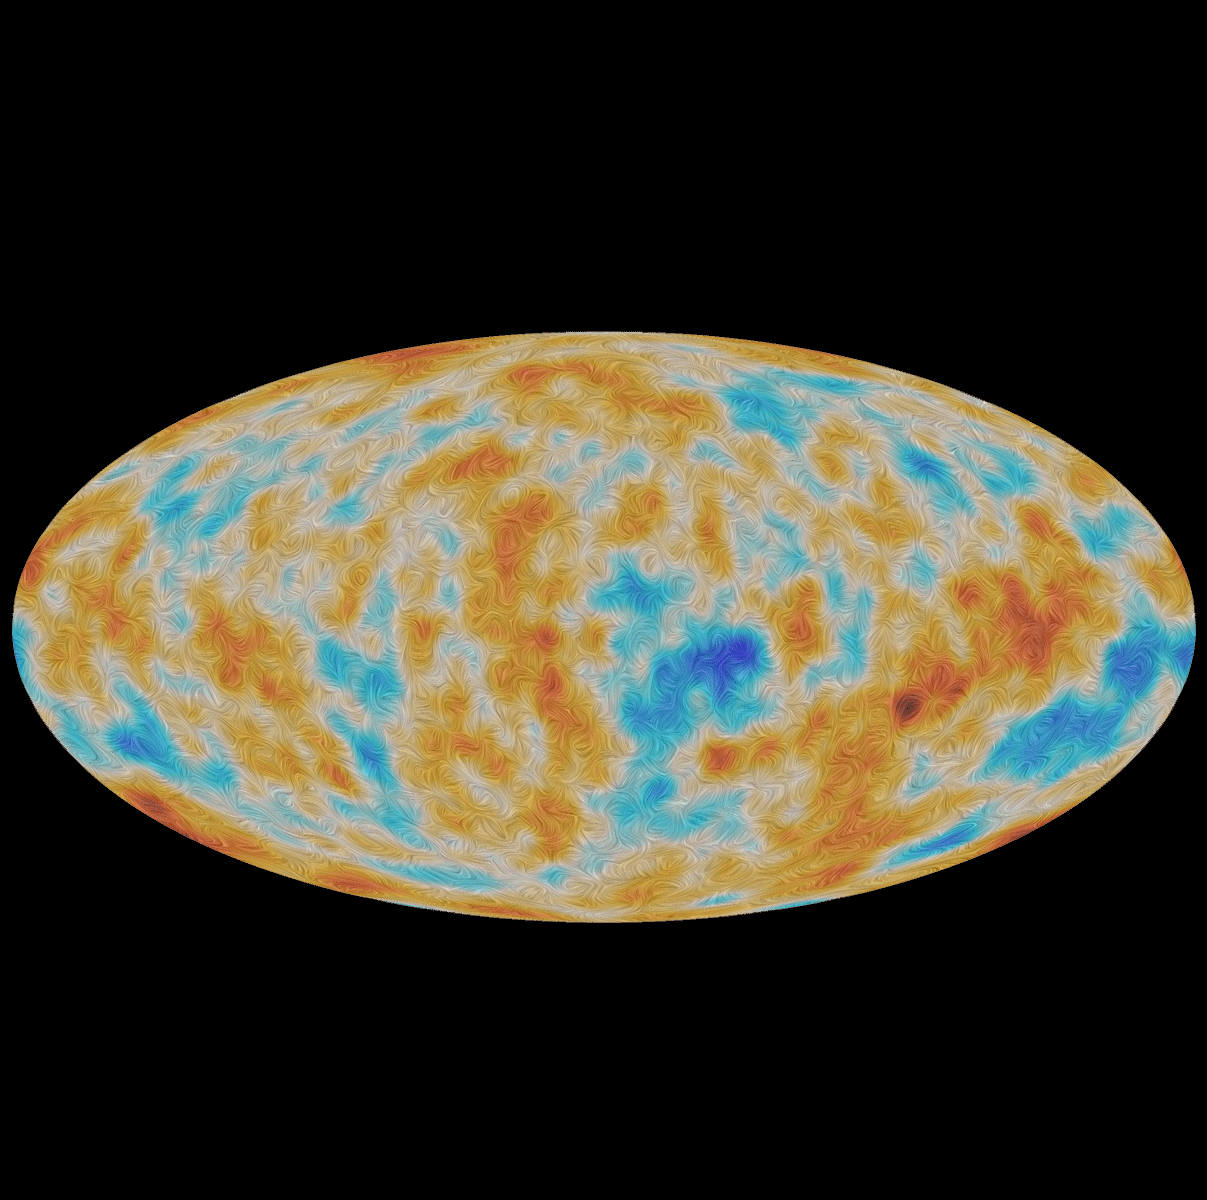 Polarisation of the Cosmic Microwave Background: full sky and details